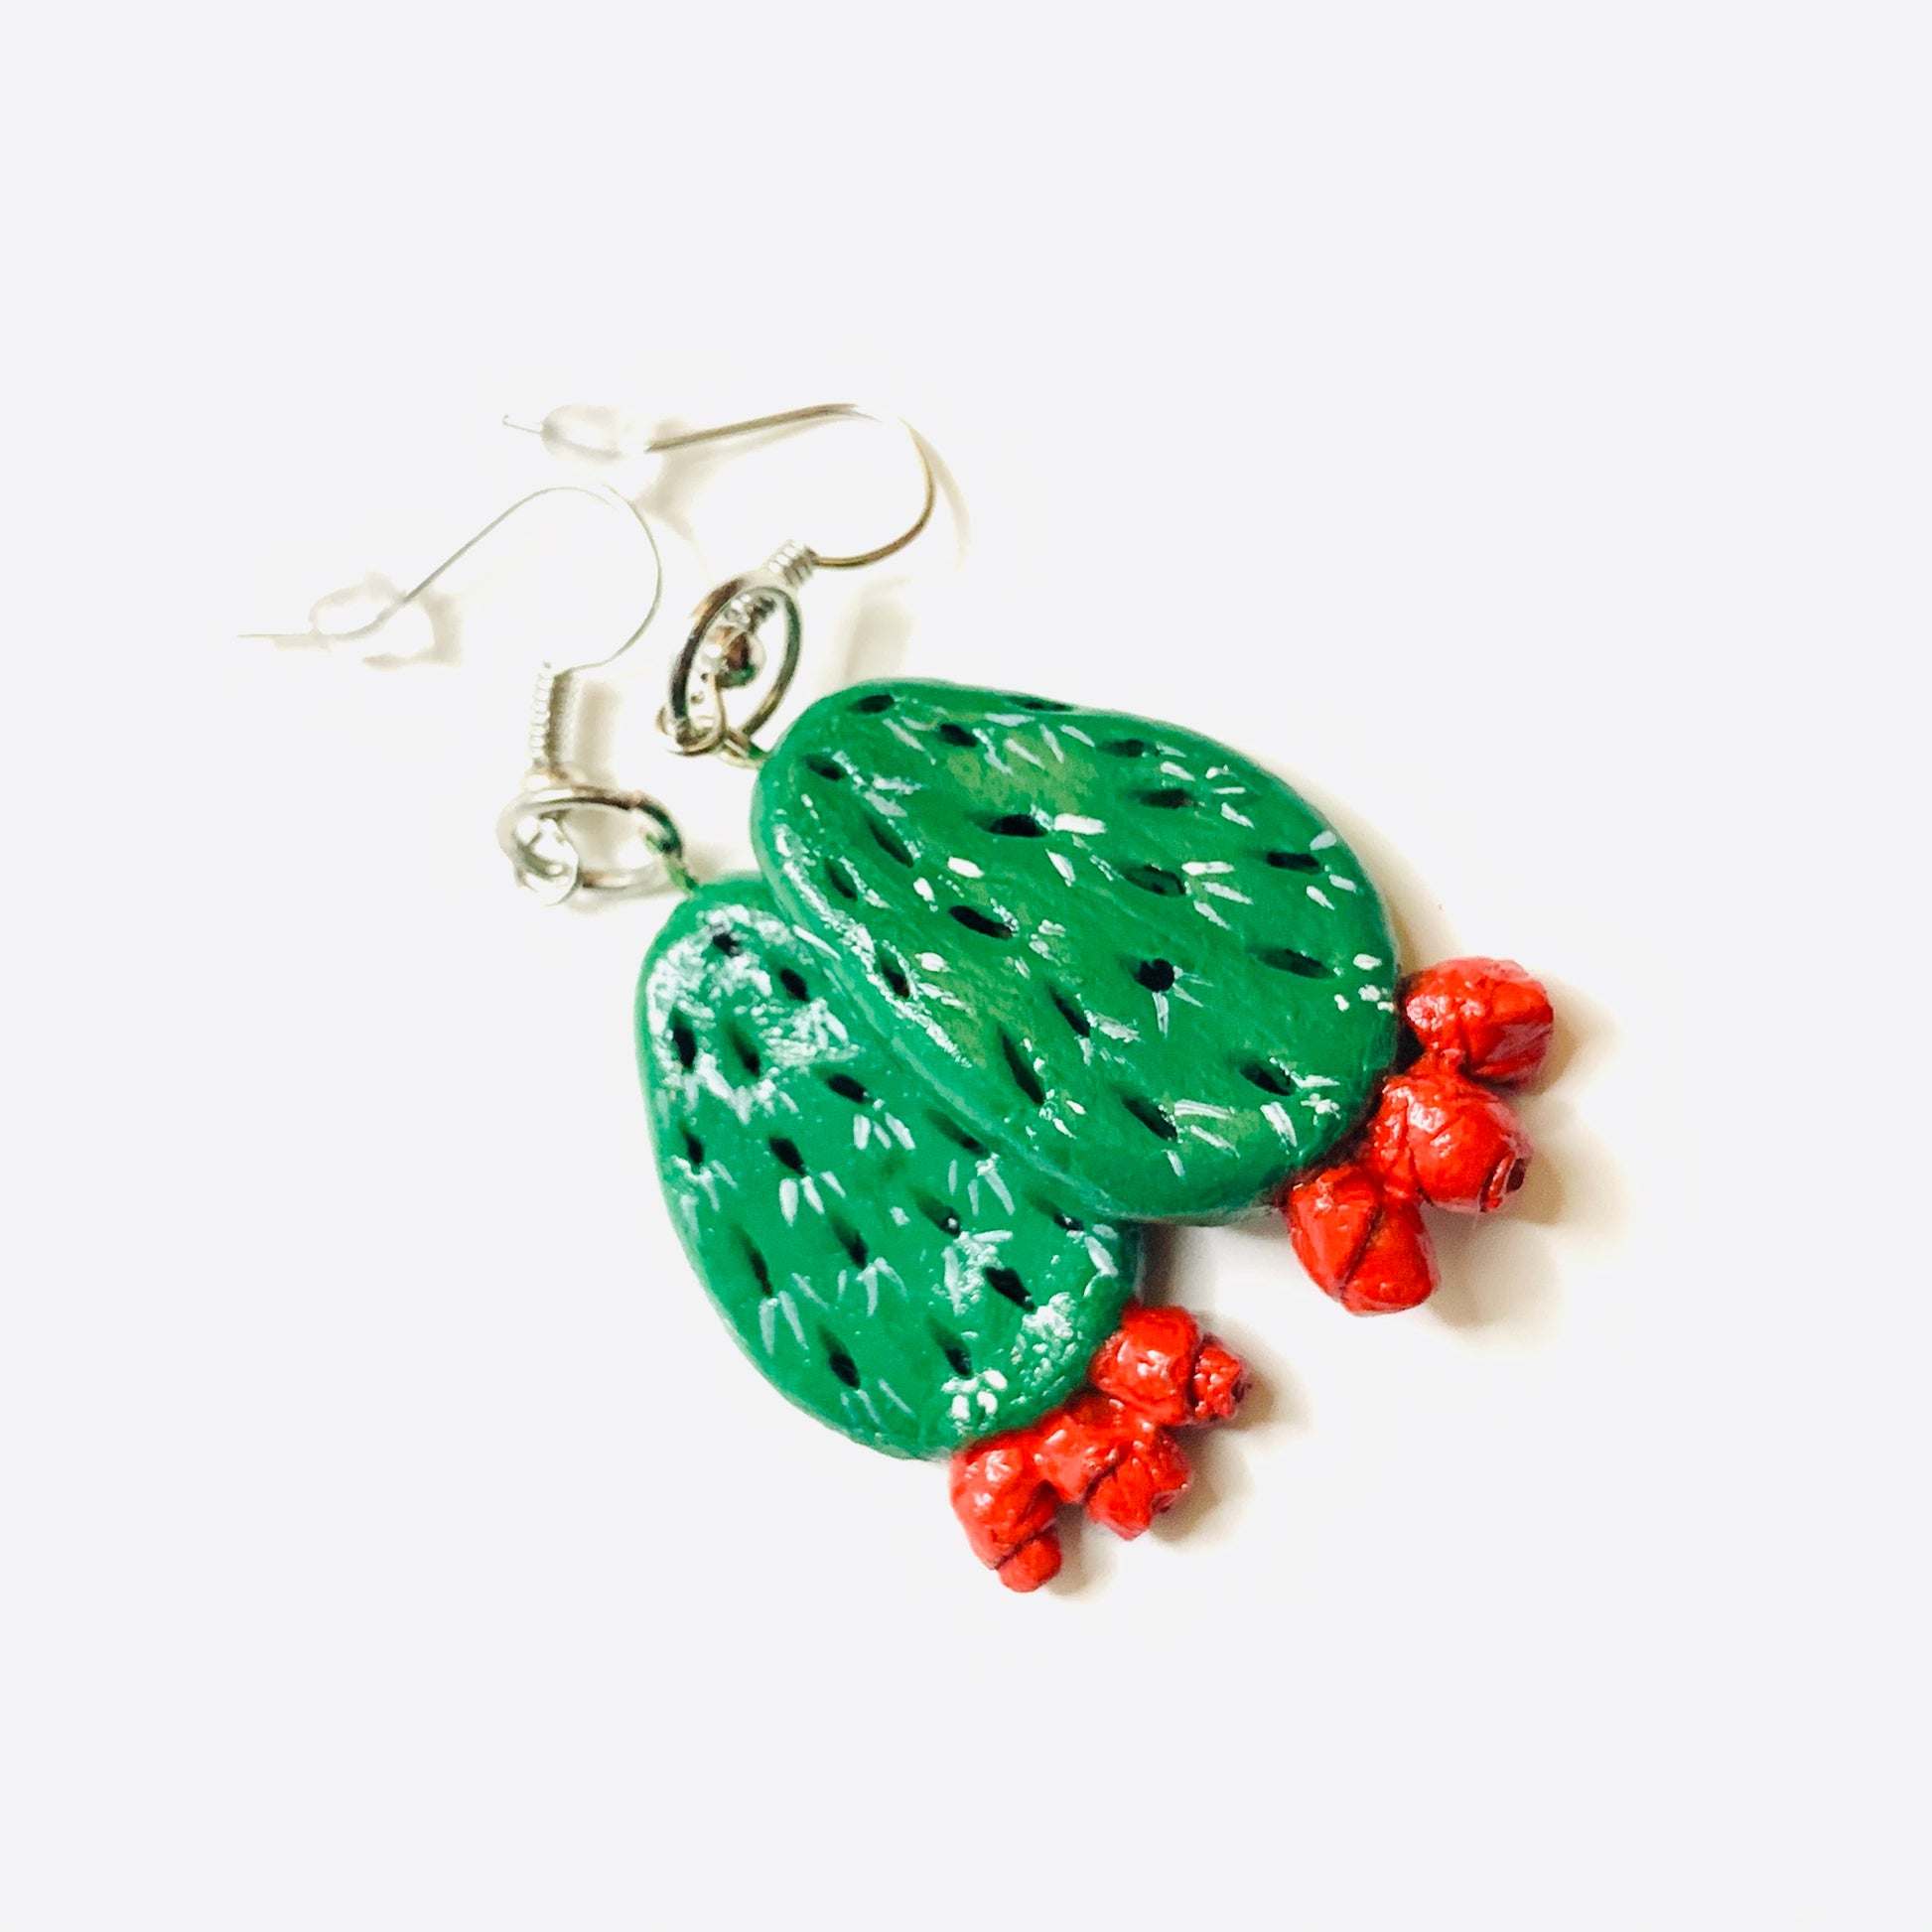 cactus earrings, clay cactus earrings, clay jewelry, mexican jewelry, mexico folk art, nopal aretes, carved handmade jewelry